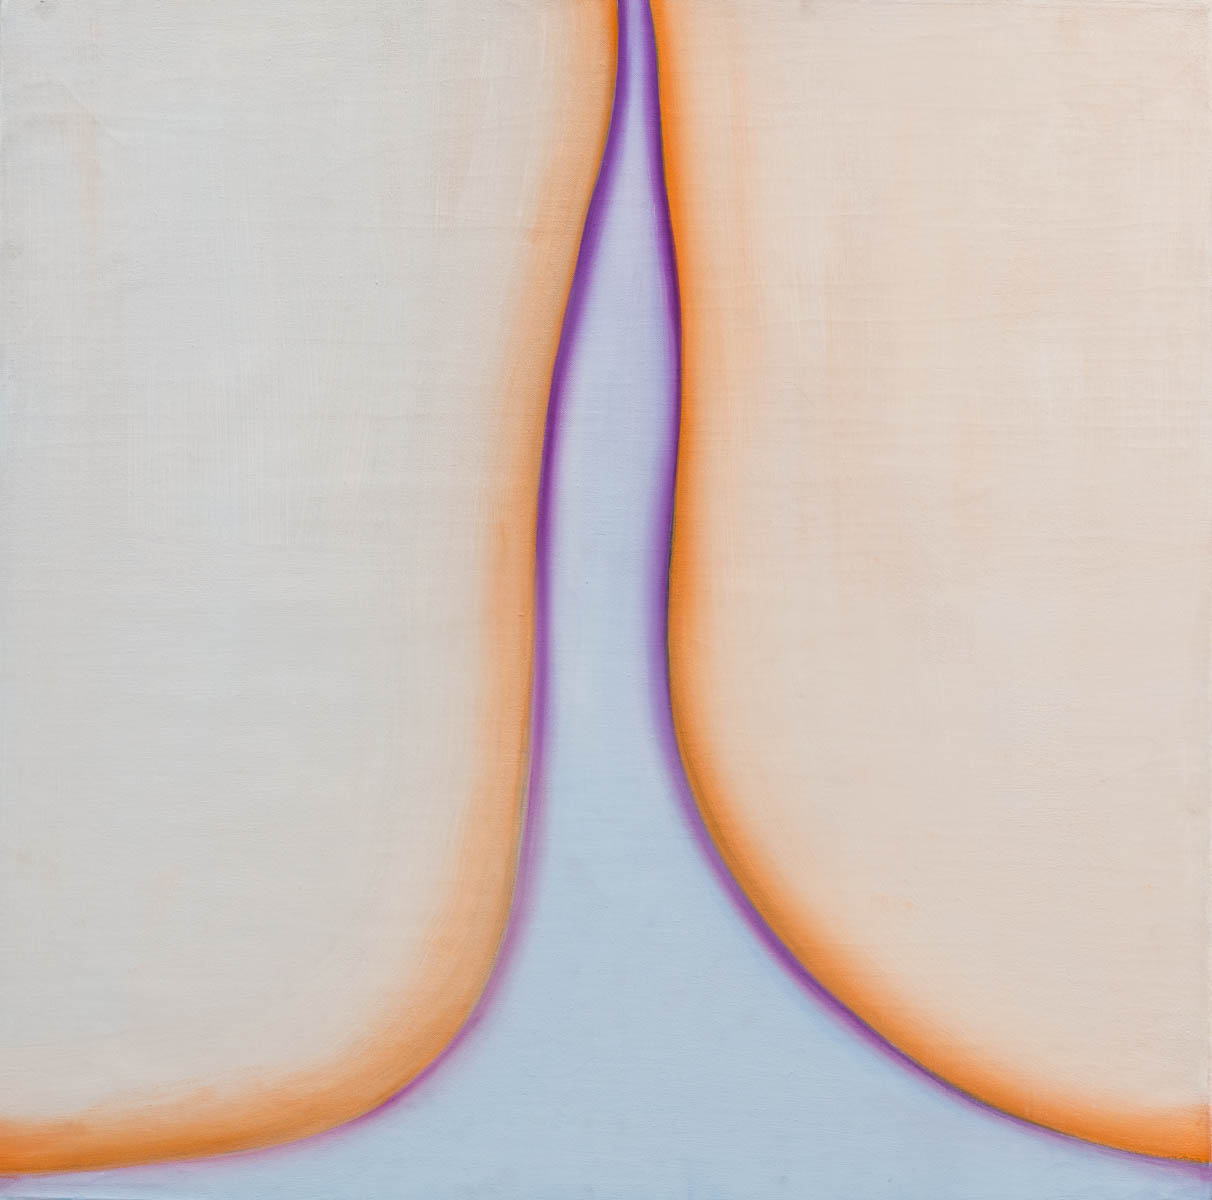 Two rounded peach shapes, outlined in purple, on a blue background.